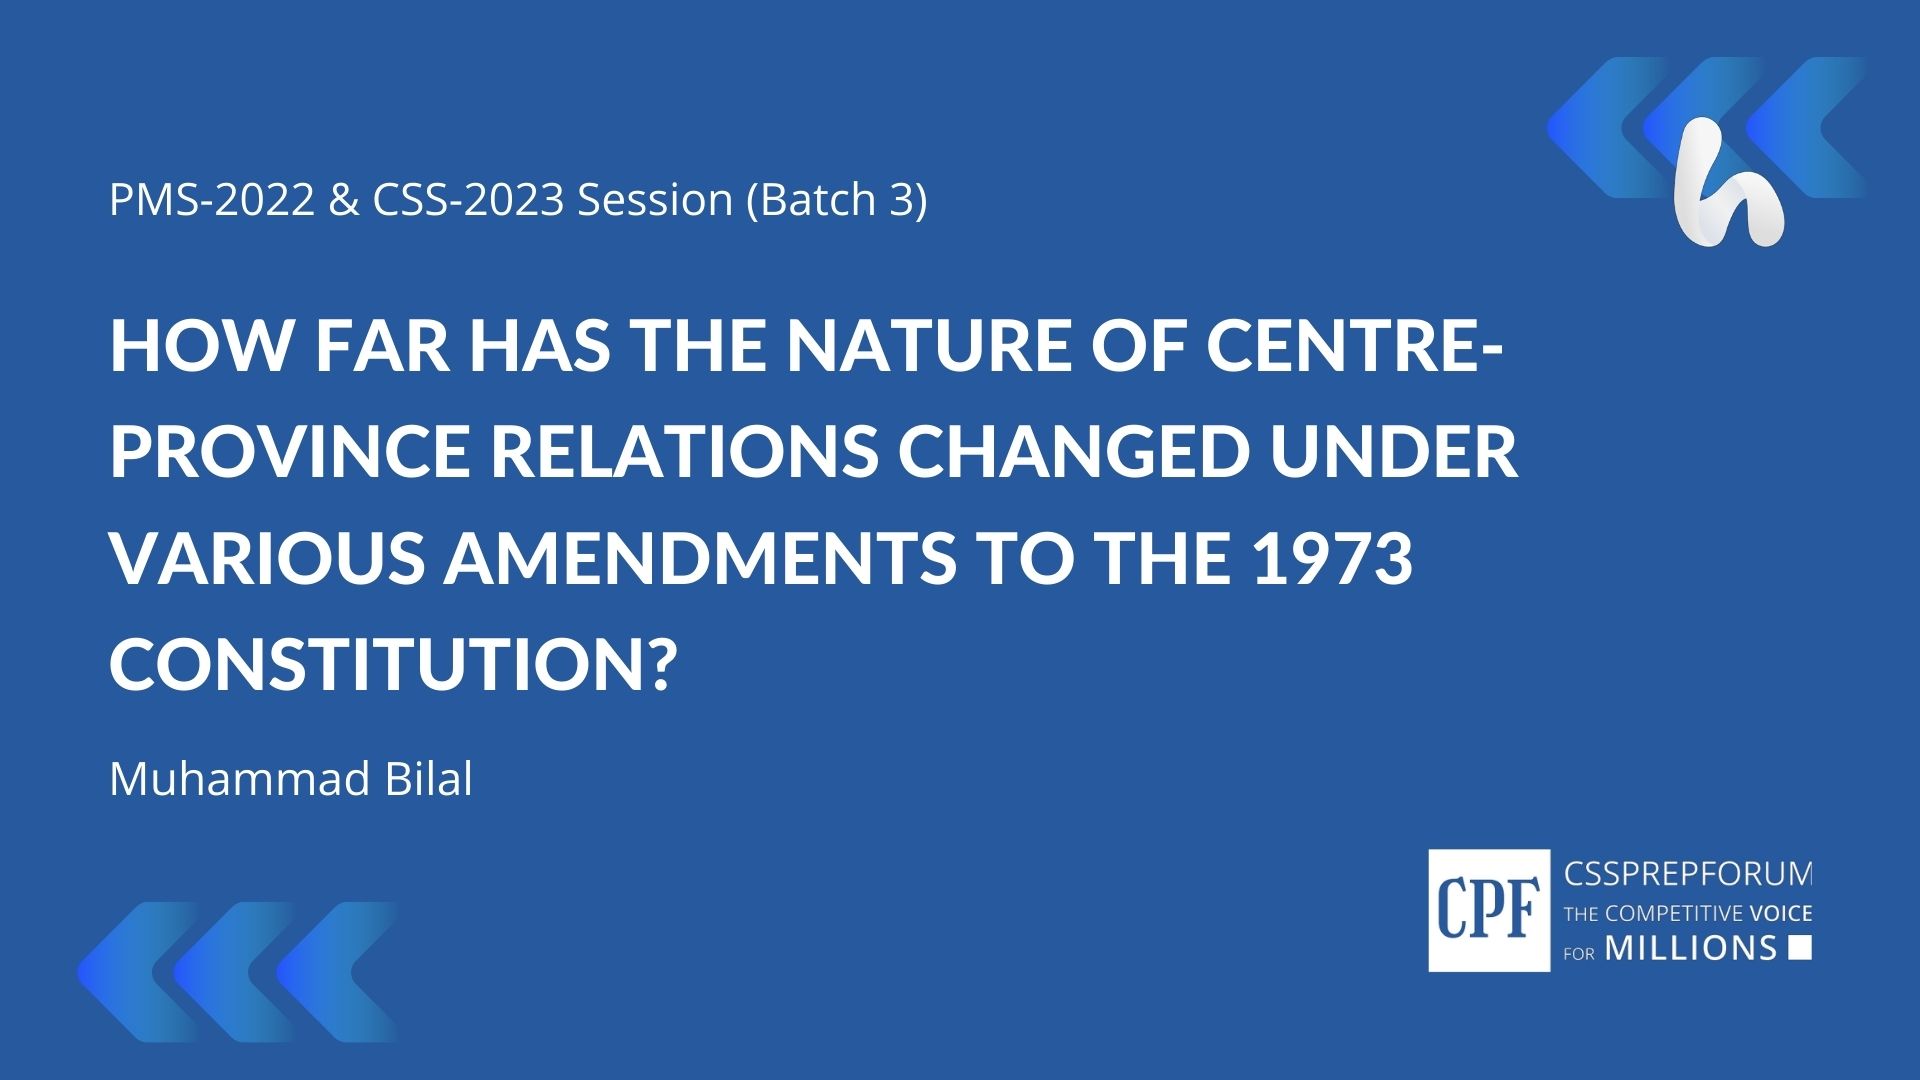 How-Far-Has-The-Nature-Of-Centre-Province-Relations-Changed-Under-Various-Amendments-To-The-1973-Constitution